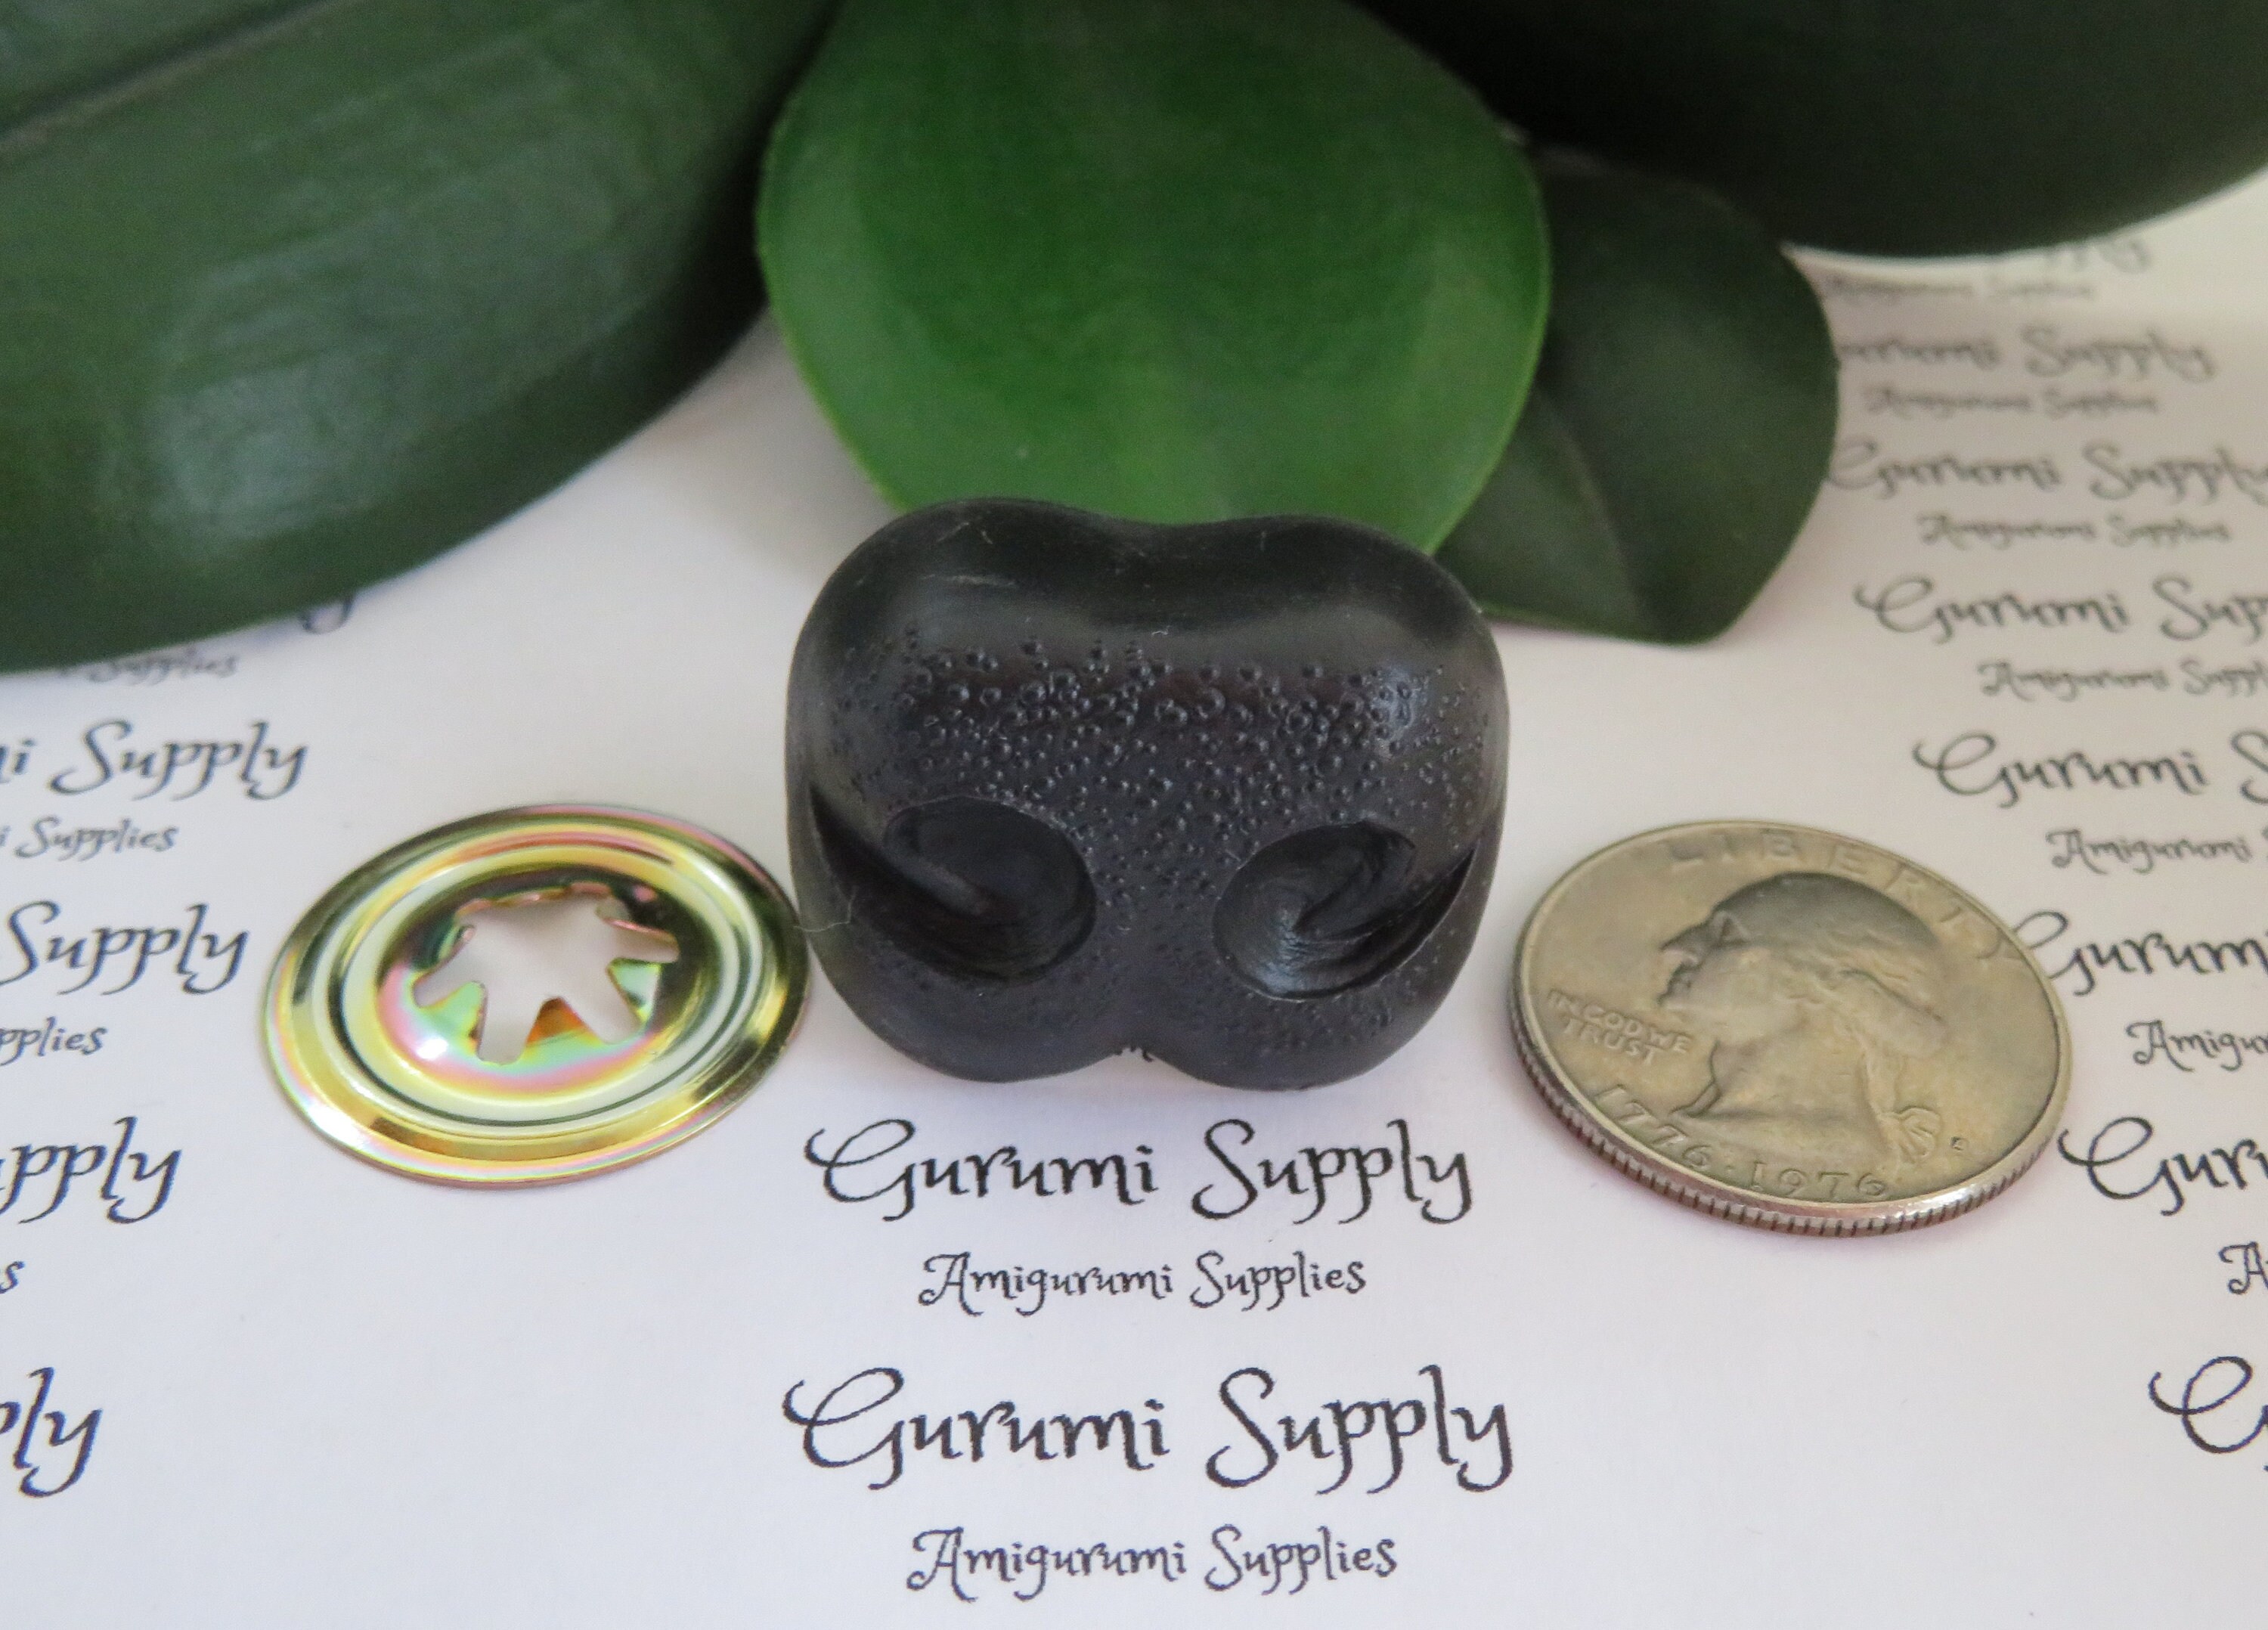 Limited Quantity! 18mmSolid Black Safety Noses with Metal Washer - 2 ct -  Amigurumi / Dogs / Bears / Creations / Animal / Toys / Crochet